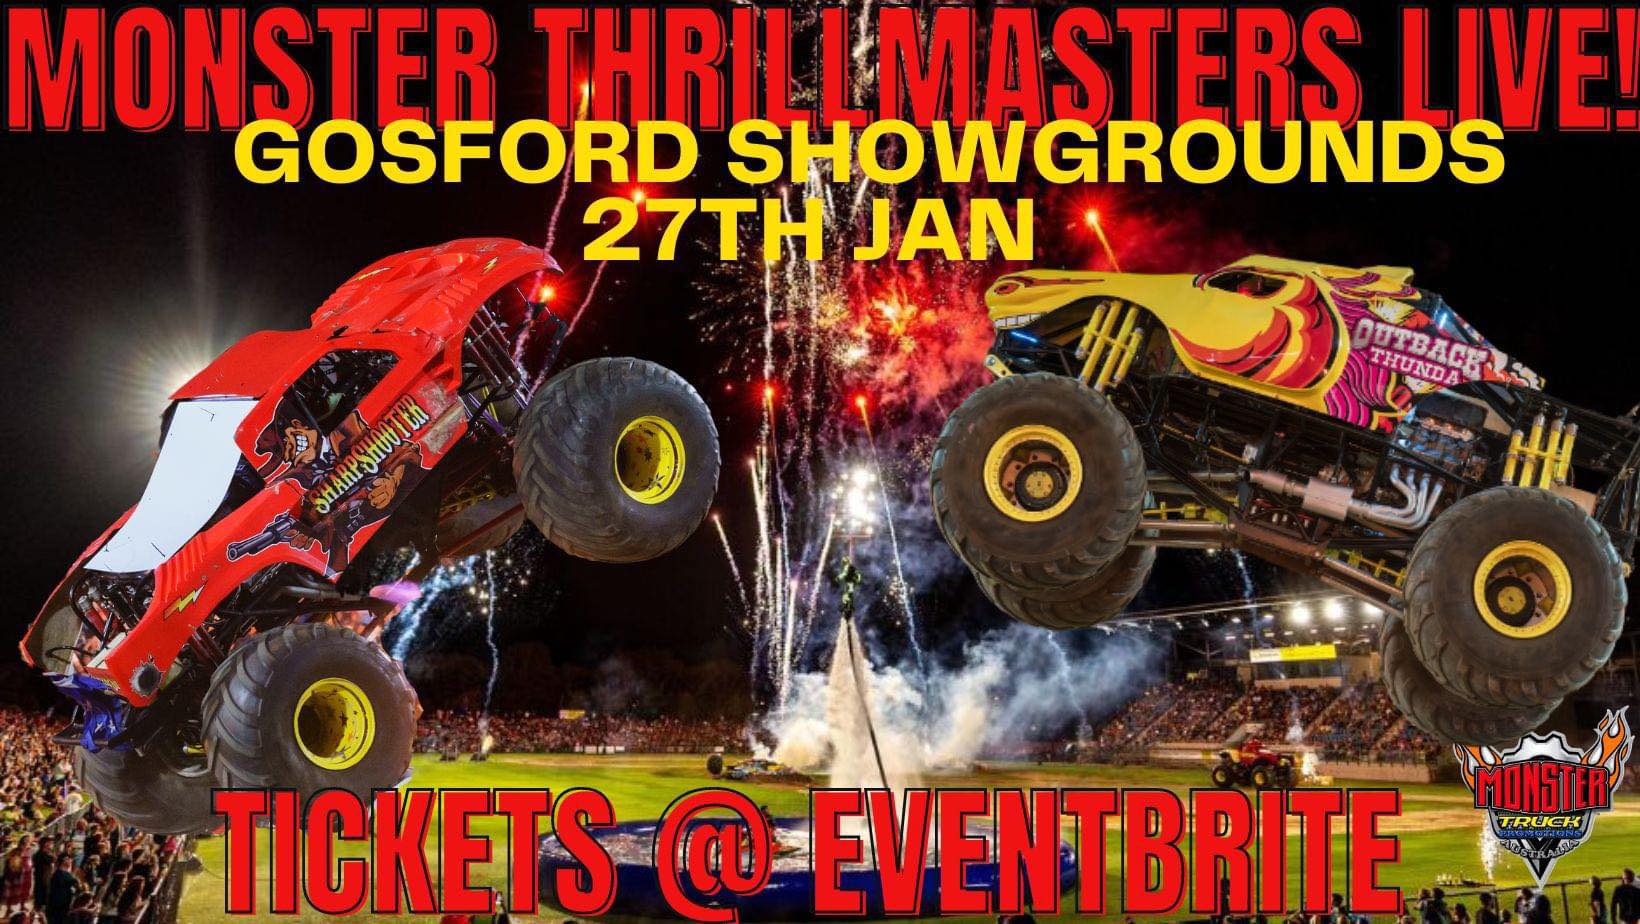 Hold onto your hats, Gosford! Monster Thrillmasters roars back into town this Saturday!